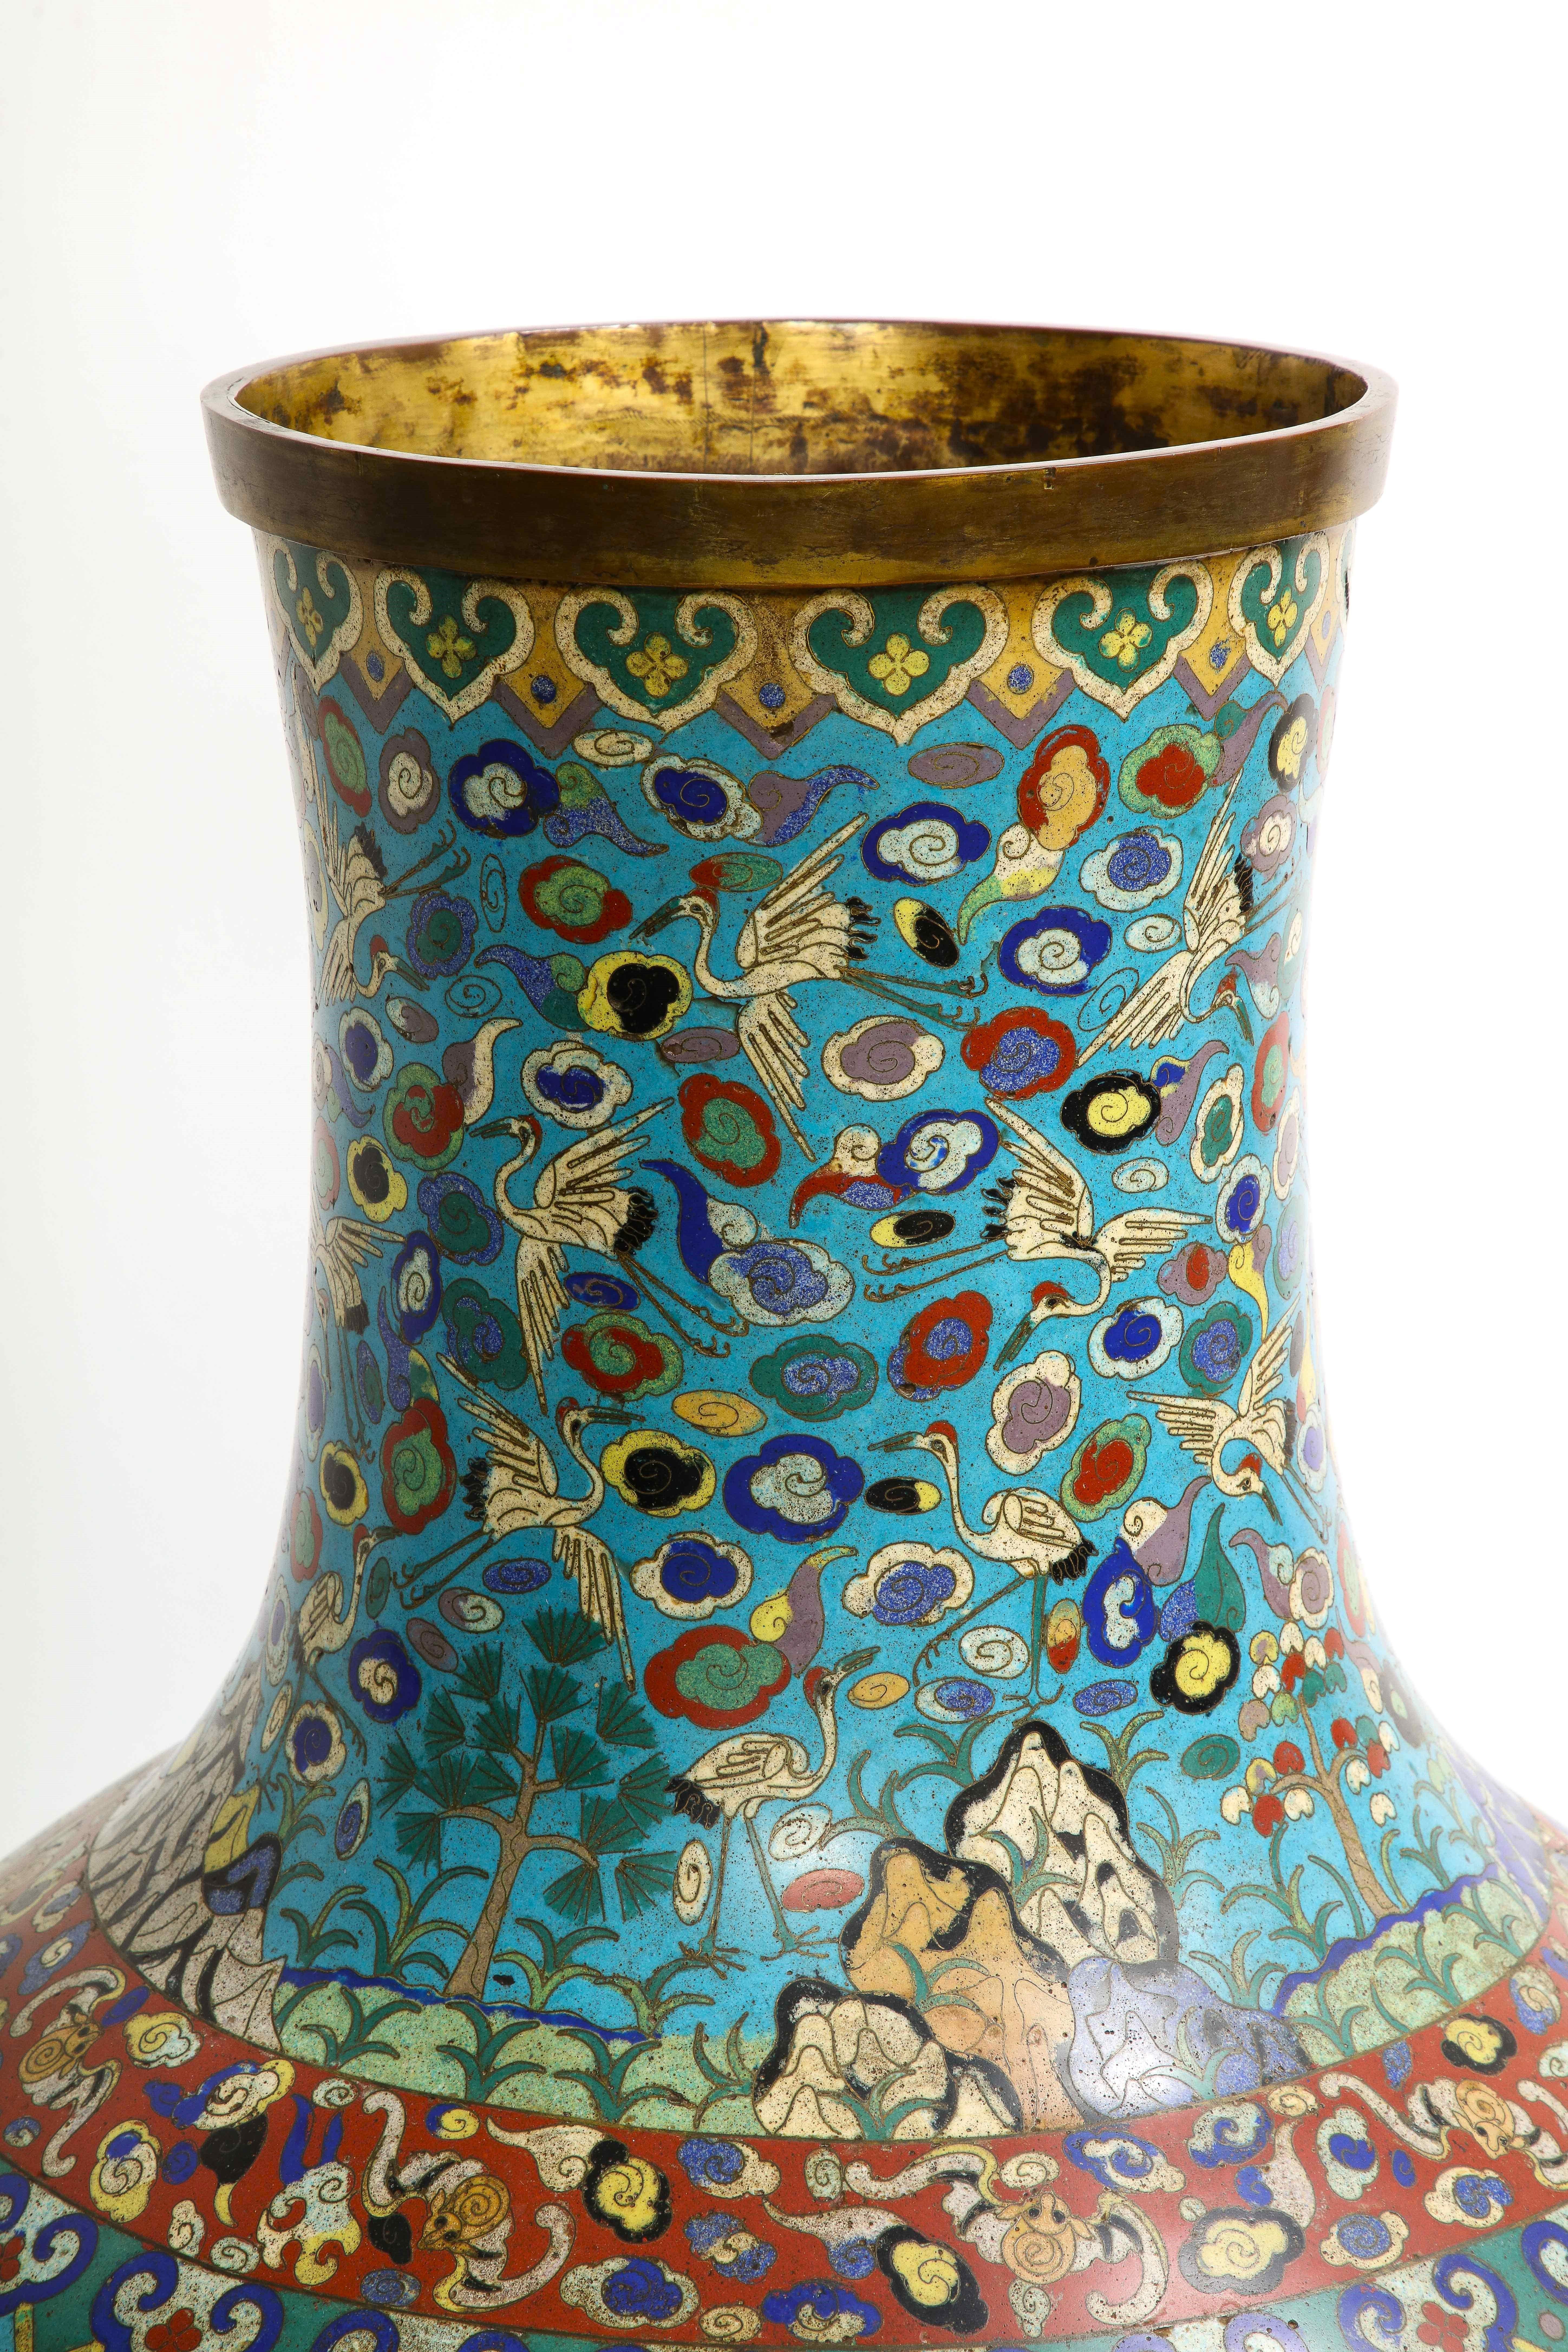 Massive Pair of 19th C. Chinese Cloisonne Enamel Vases with Deer Decoration In Good Condition For Sale In New York, NY